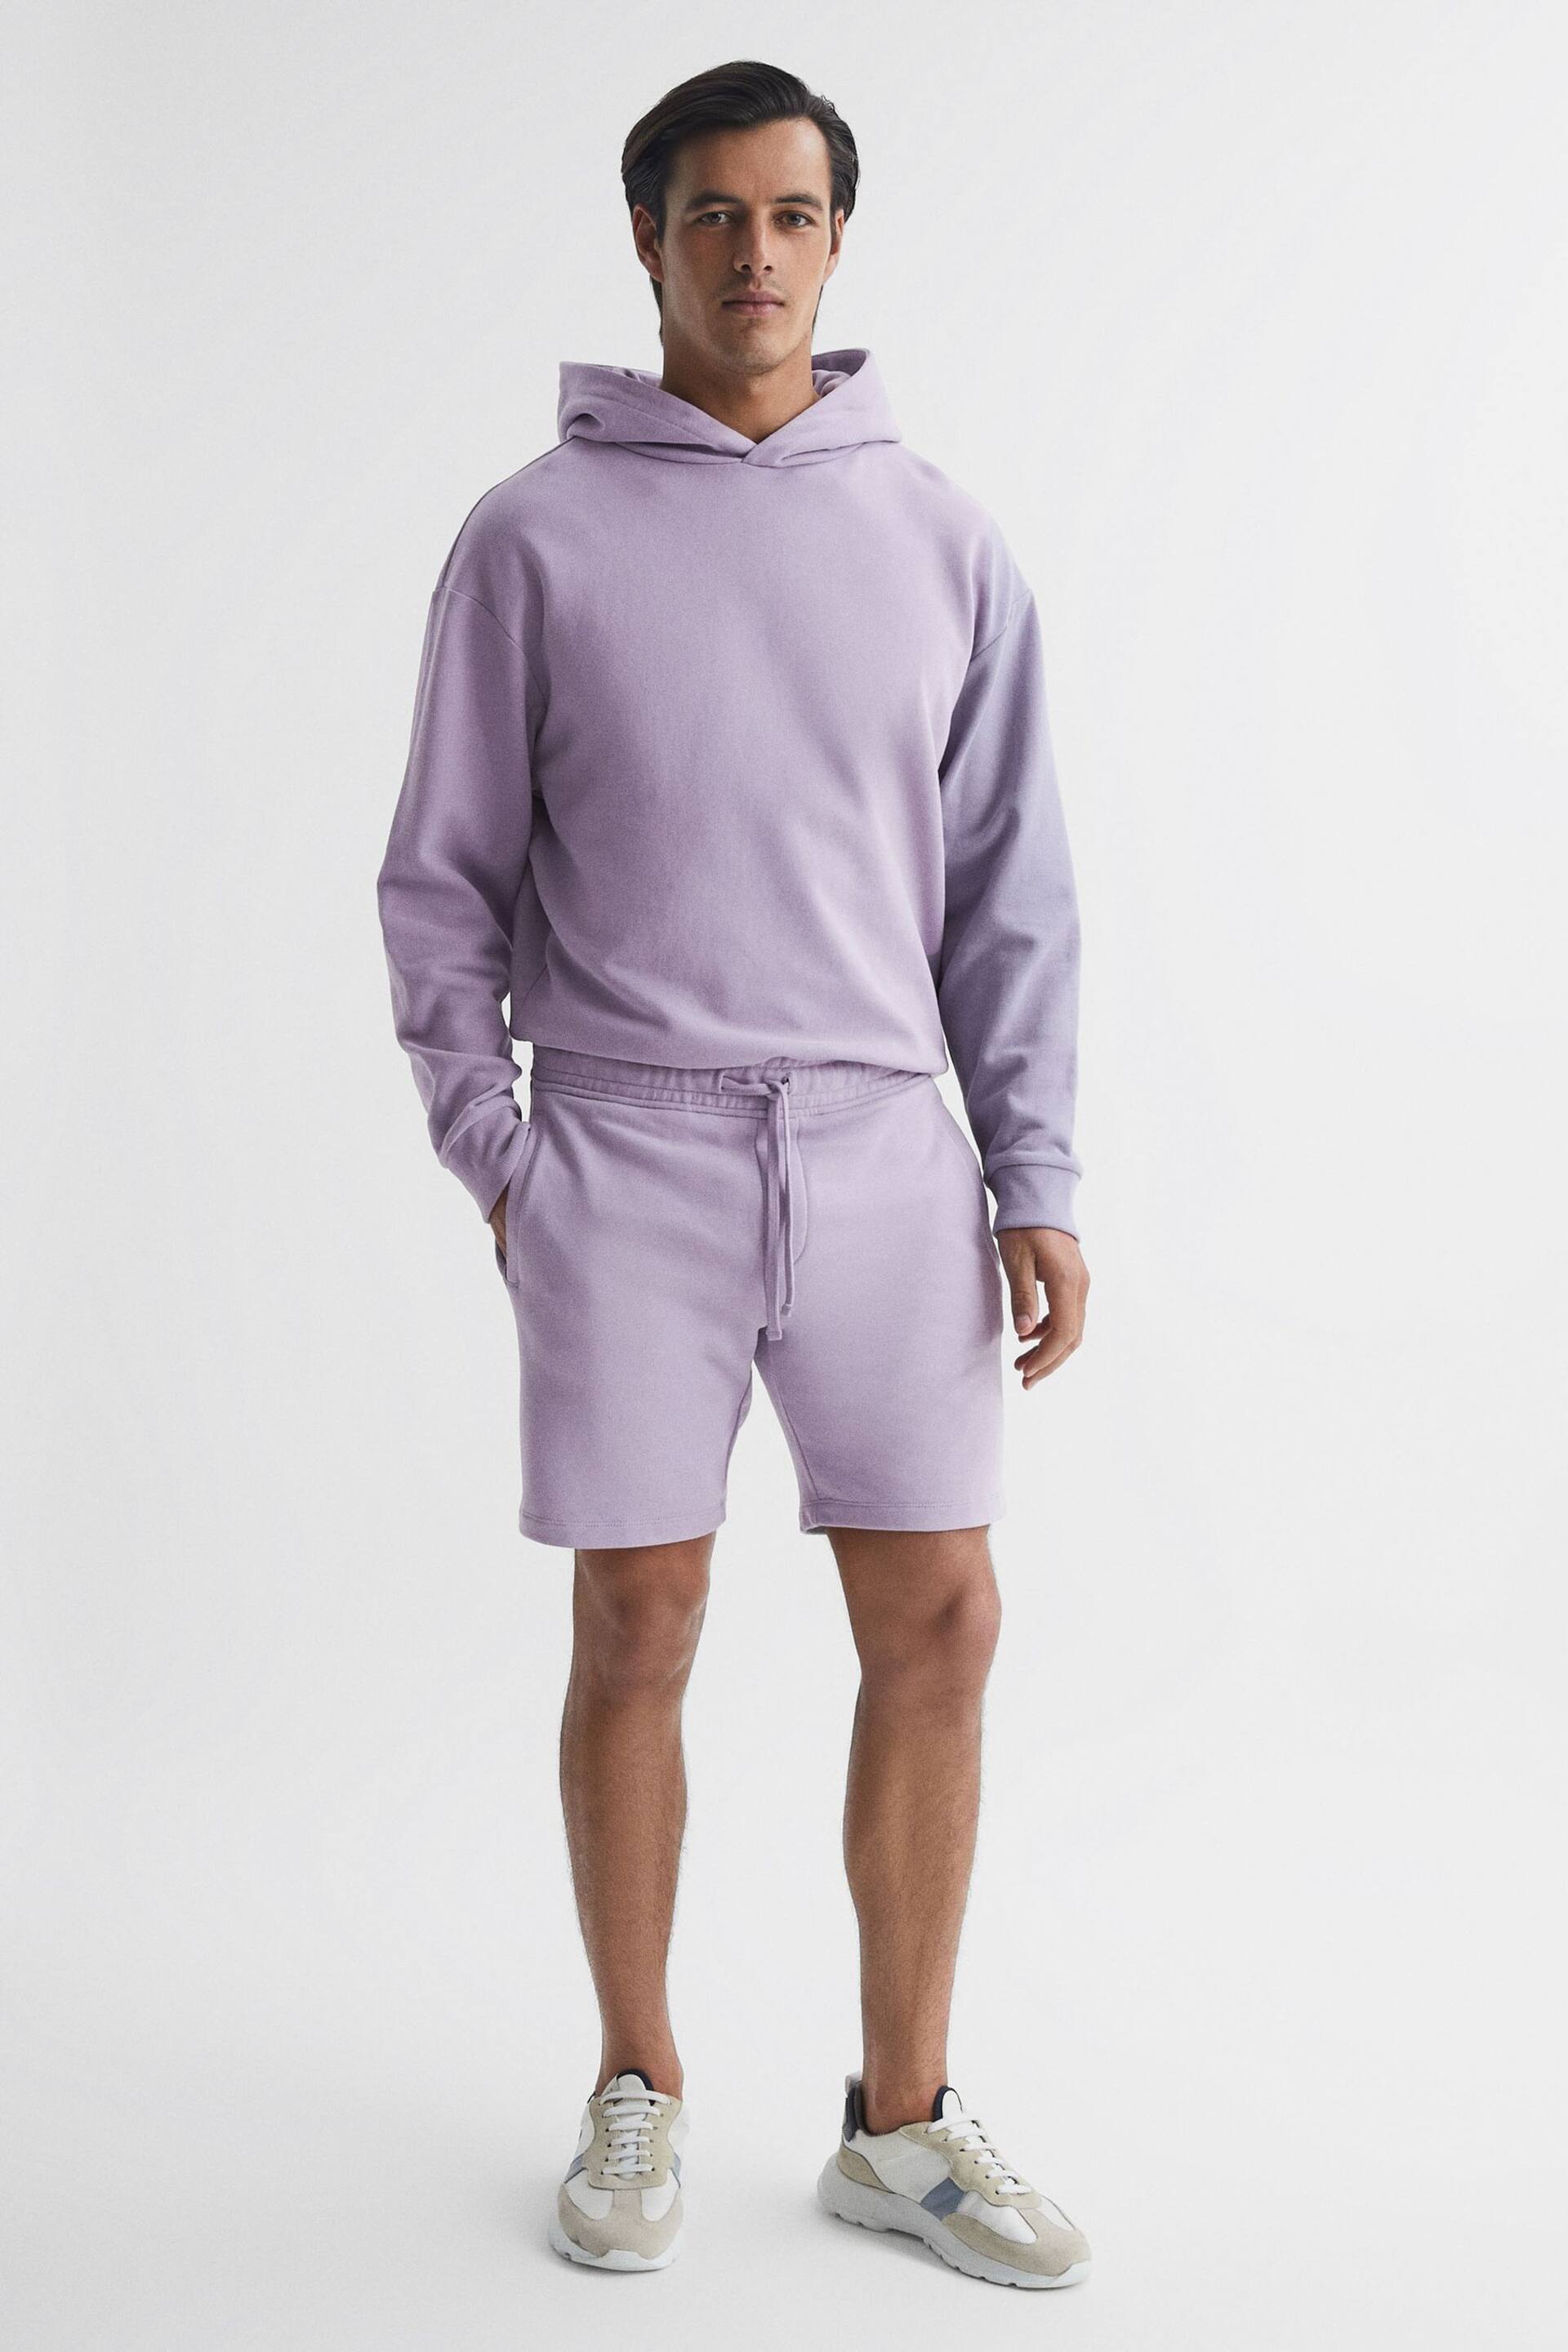 Reiss Lilac Henry Garment Dye Jersey Shorts - Image 3 of 5